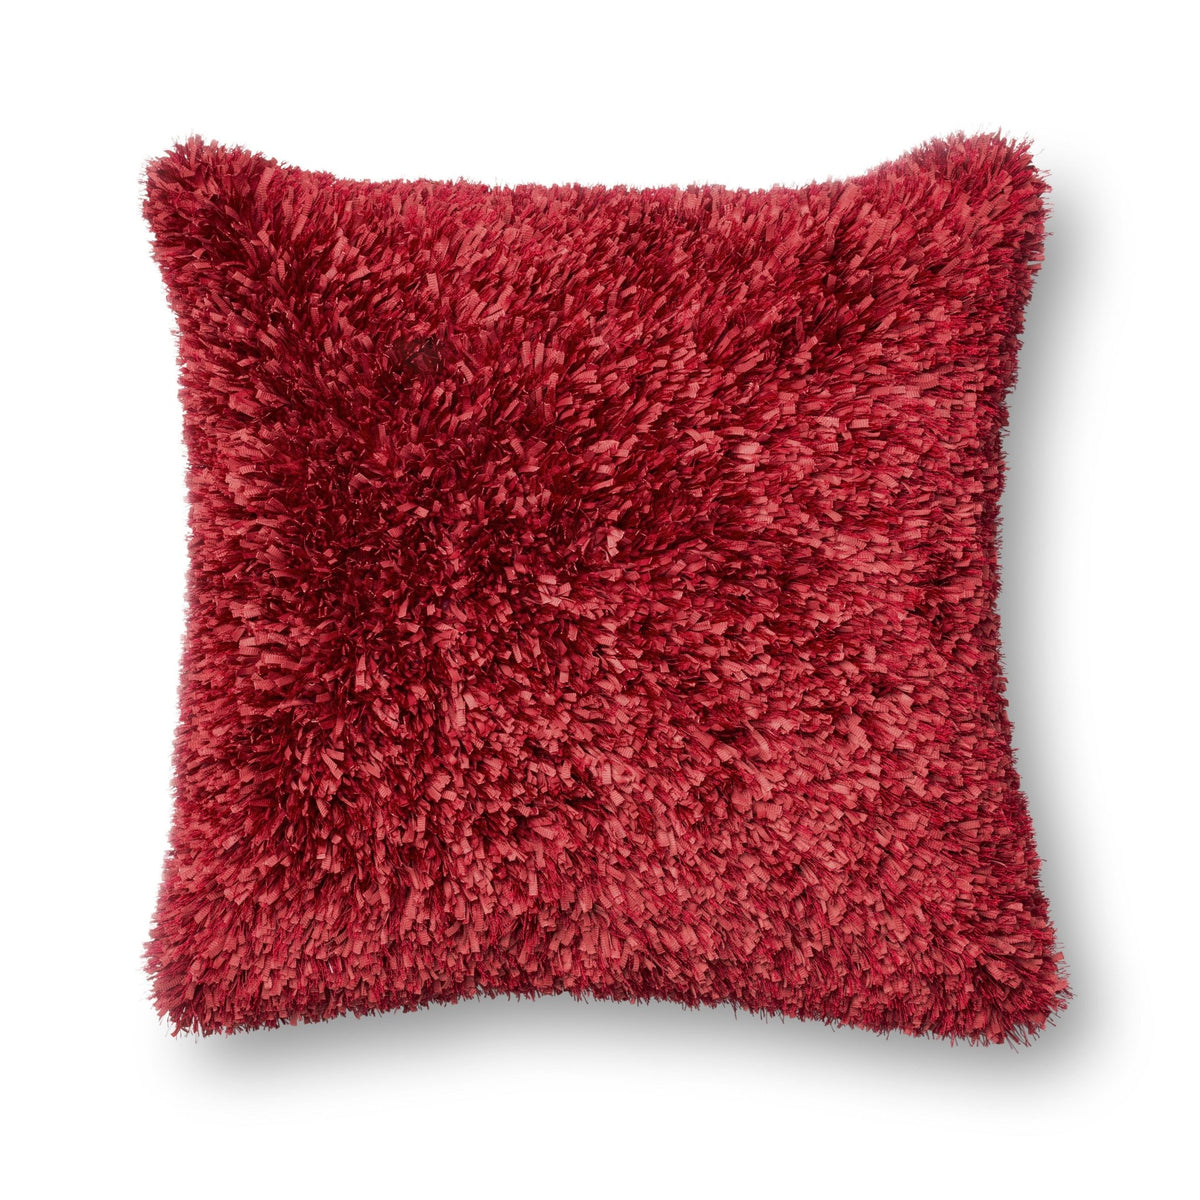 Loloi P0045 Red Pillow - Rug & Home